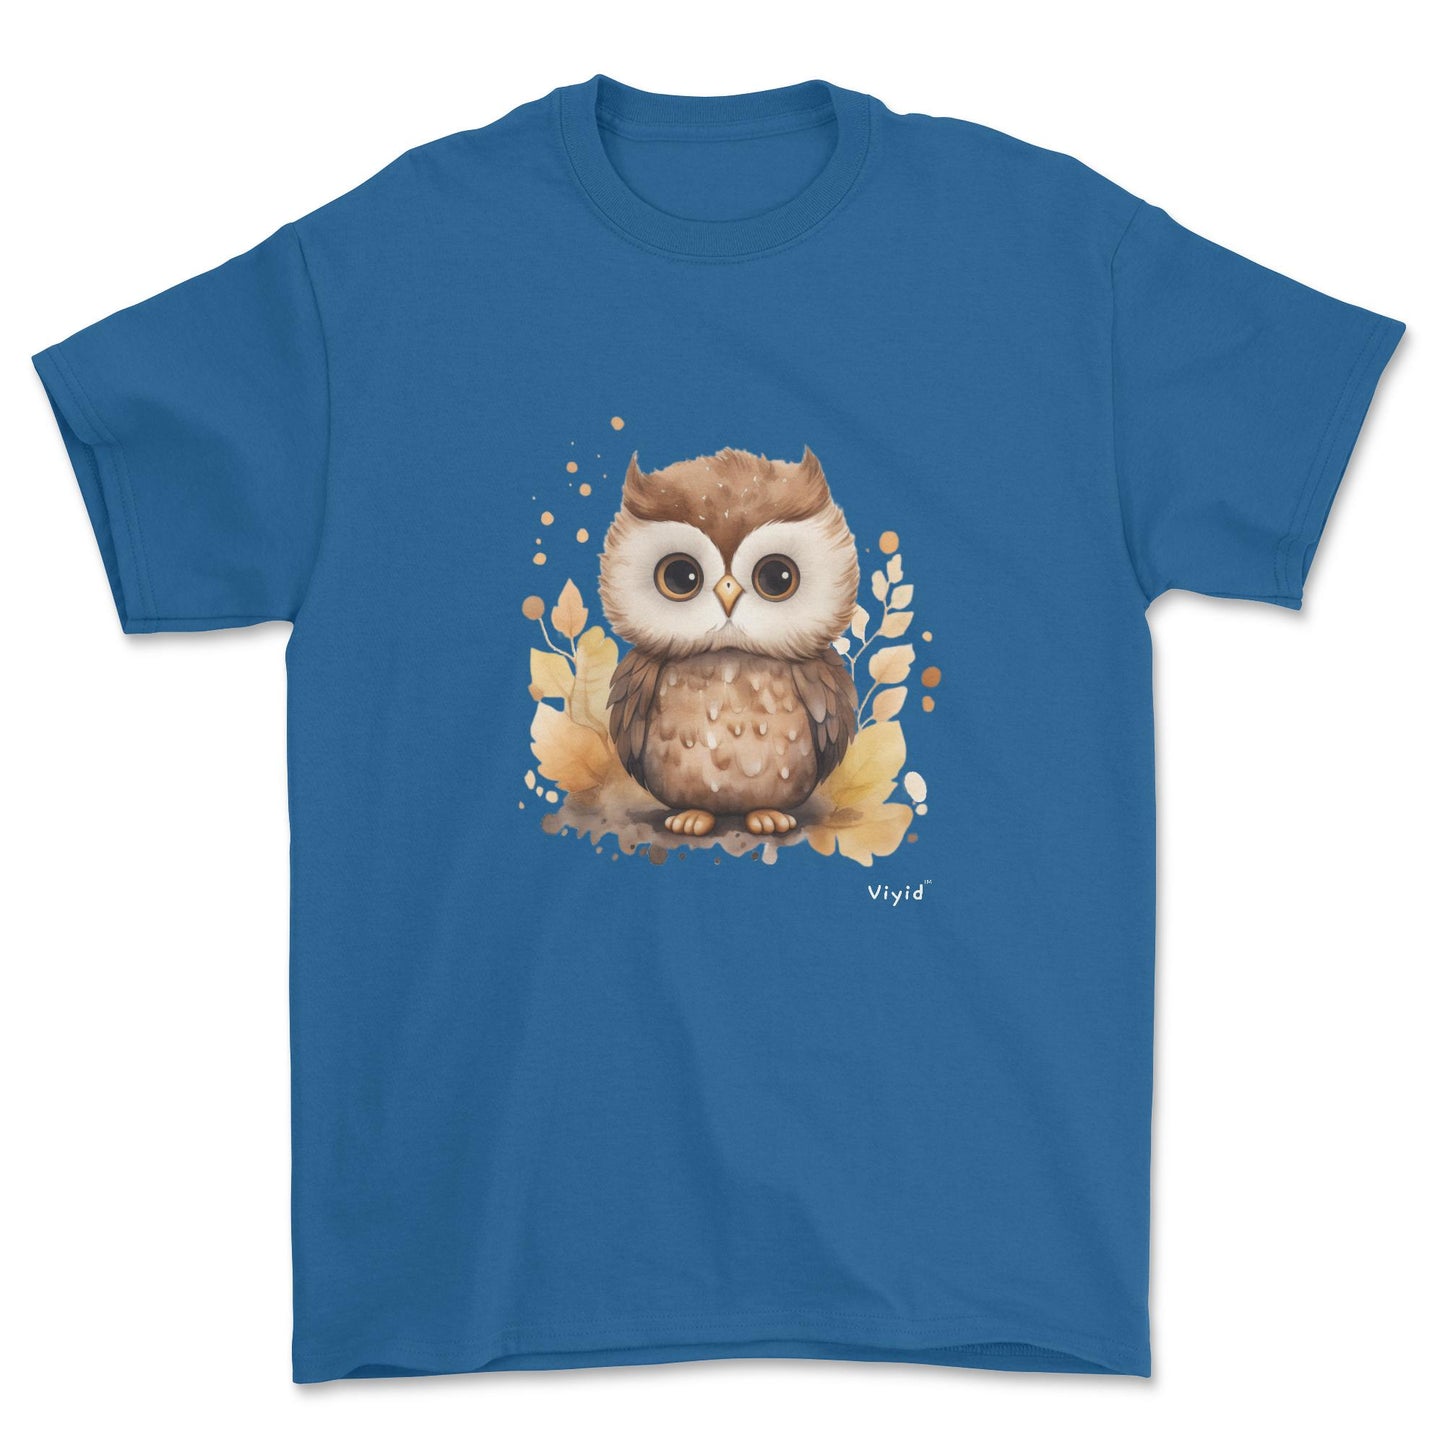 nocturnal owl adult t-shirt royal